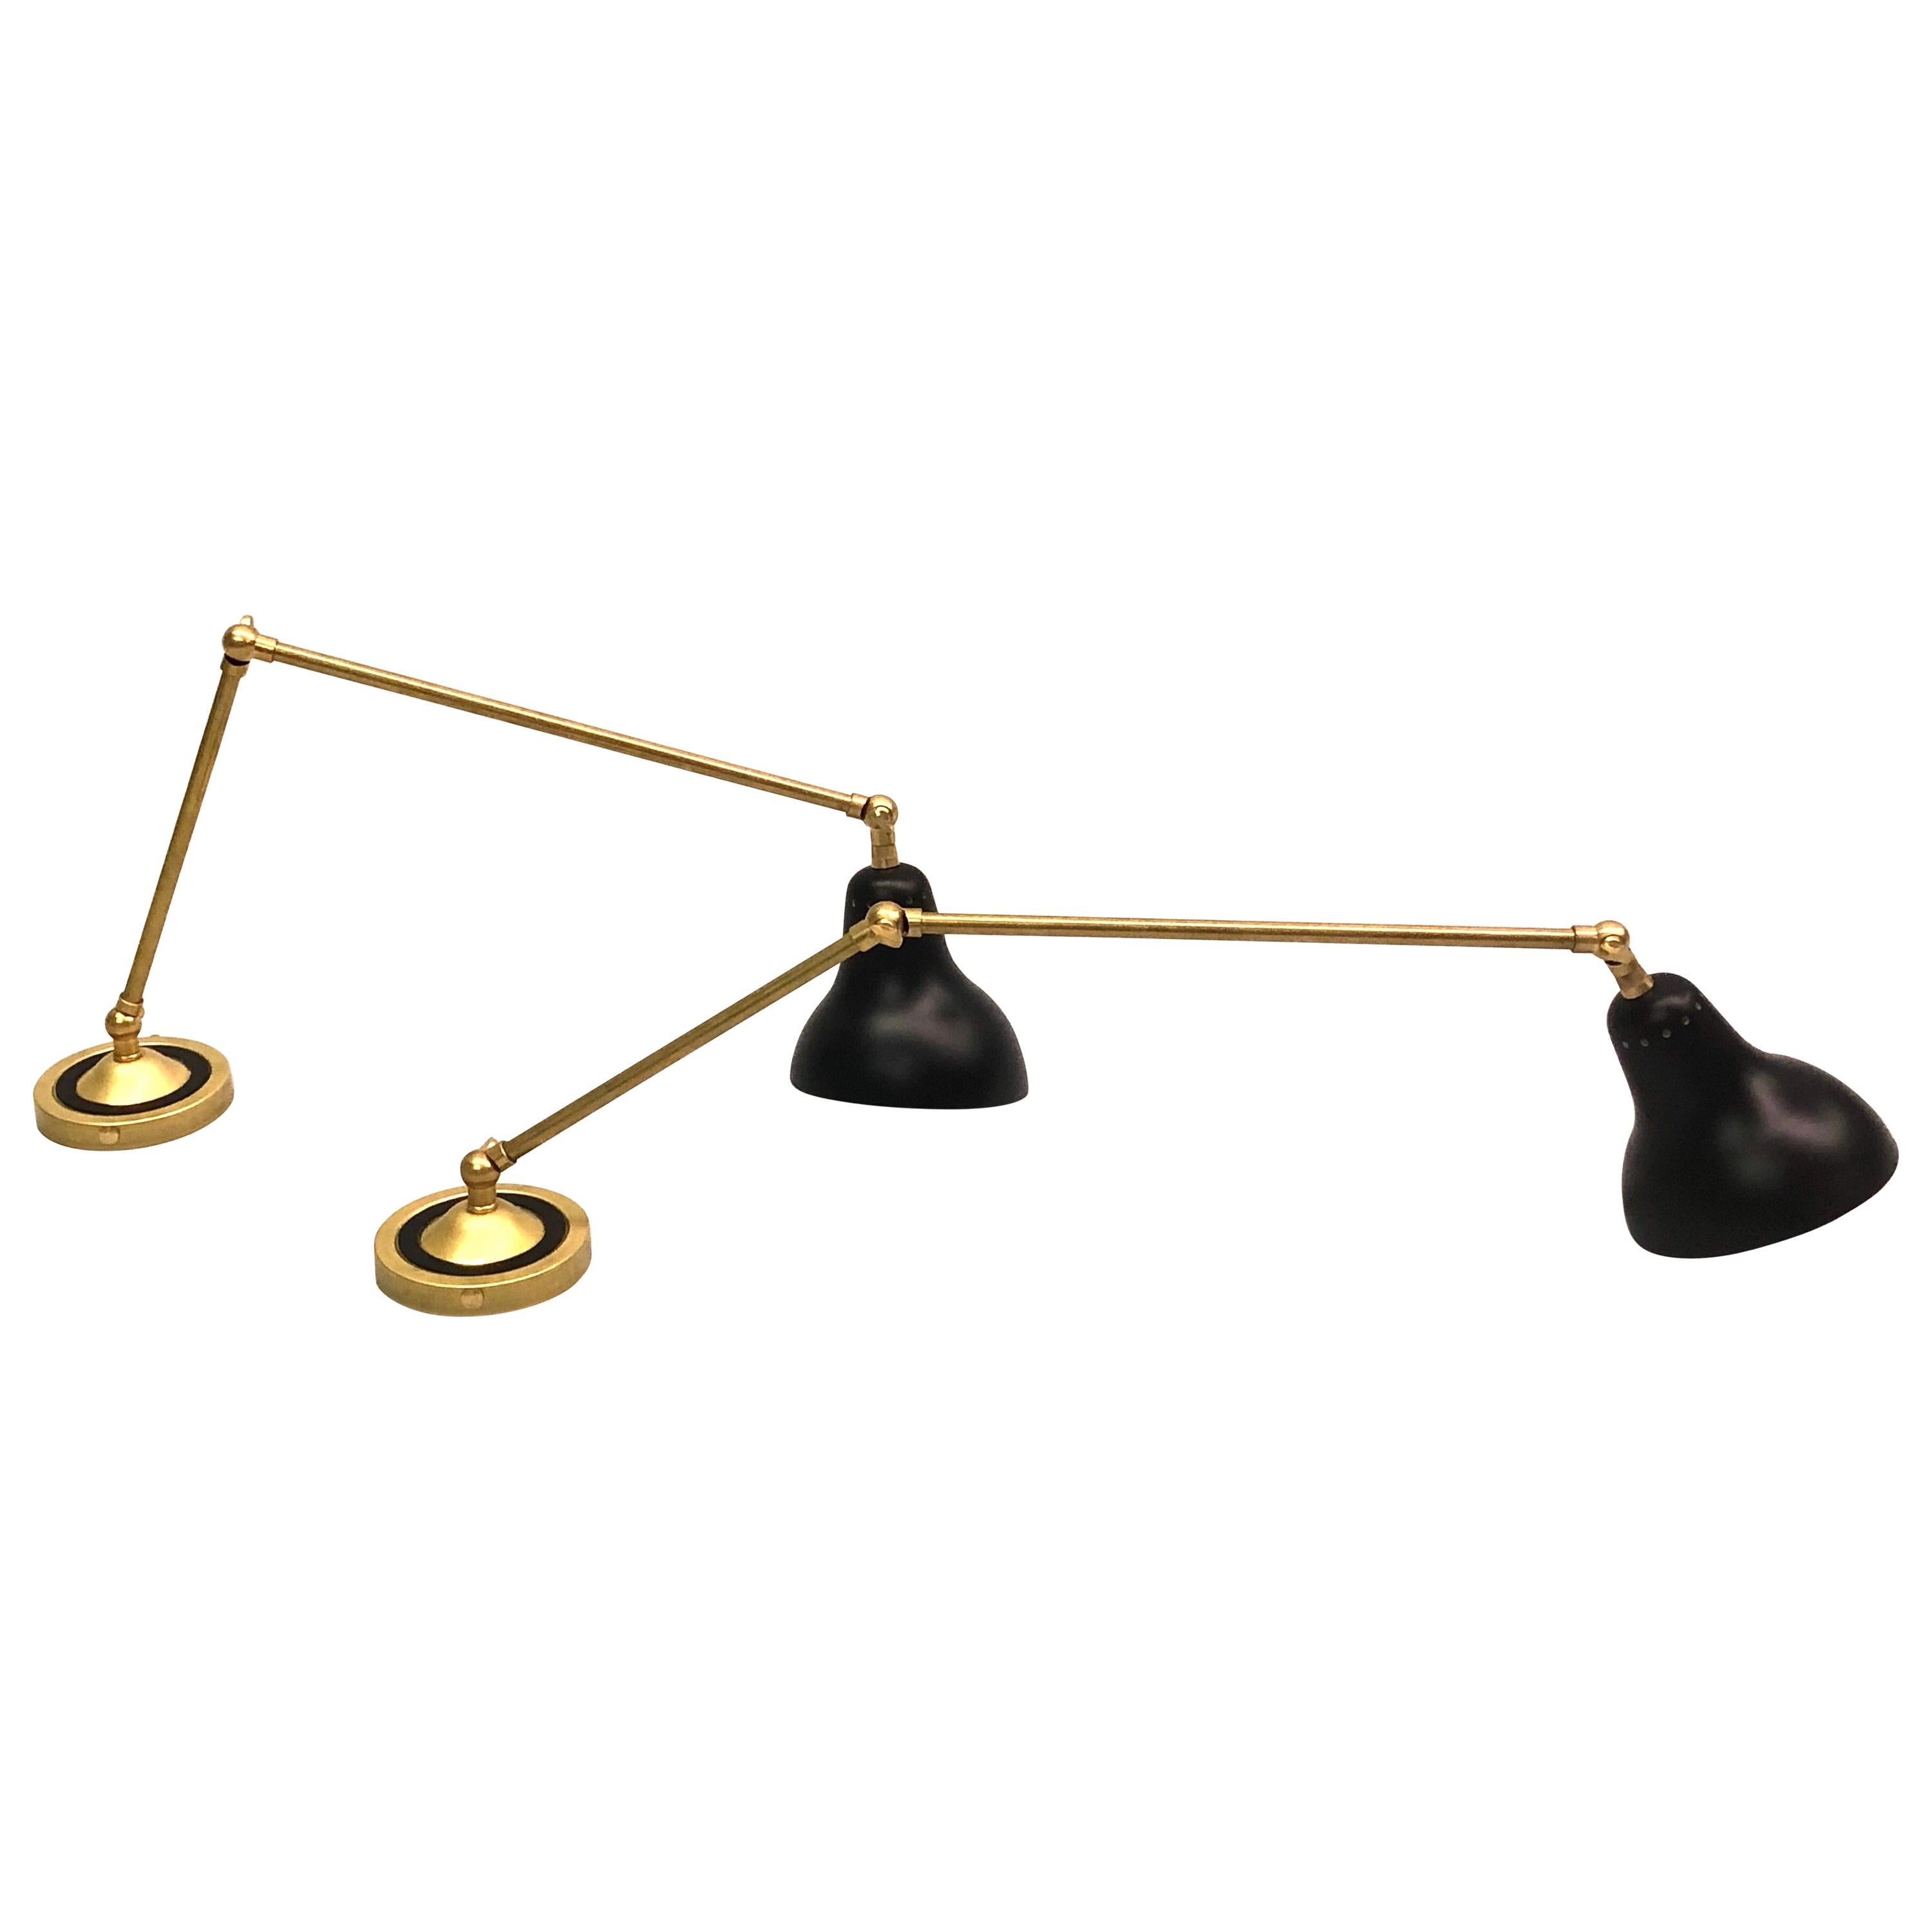 Pair of Italian Mid-Century Modern Style Brass Articulating Sconces For Sale